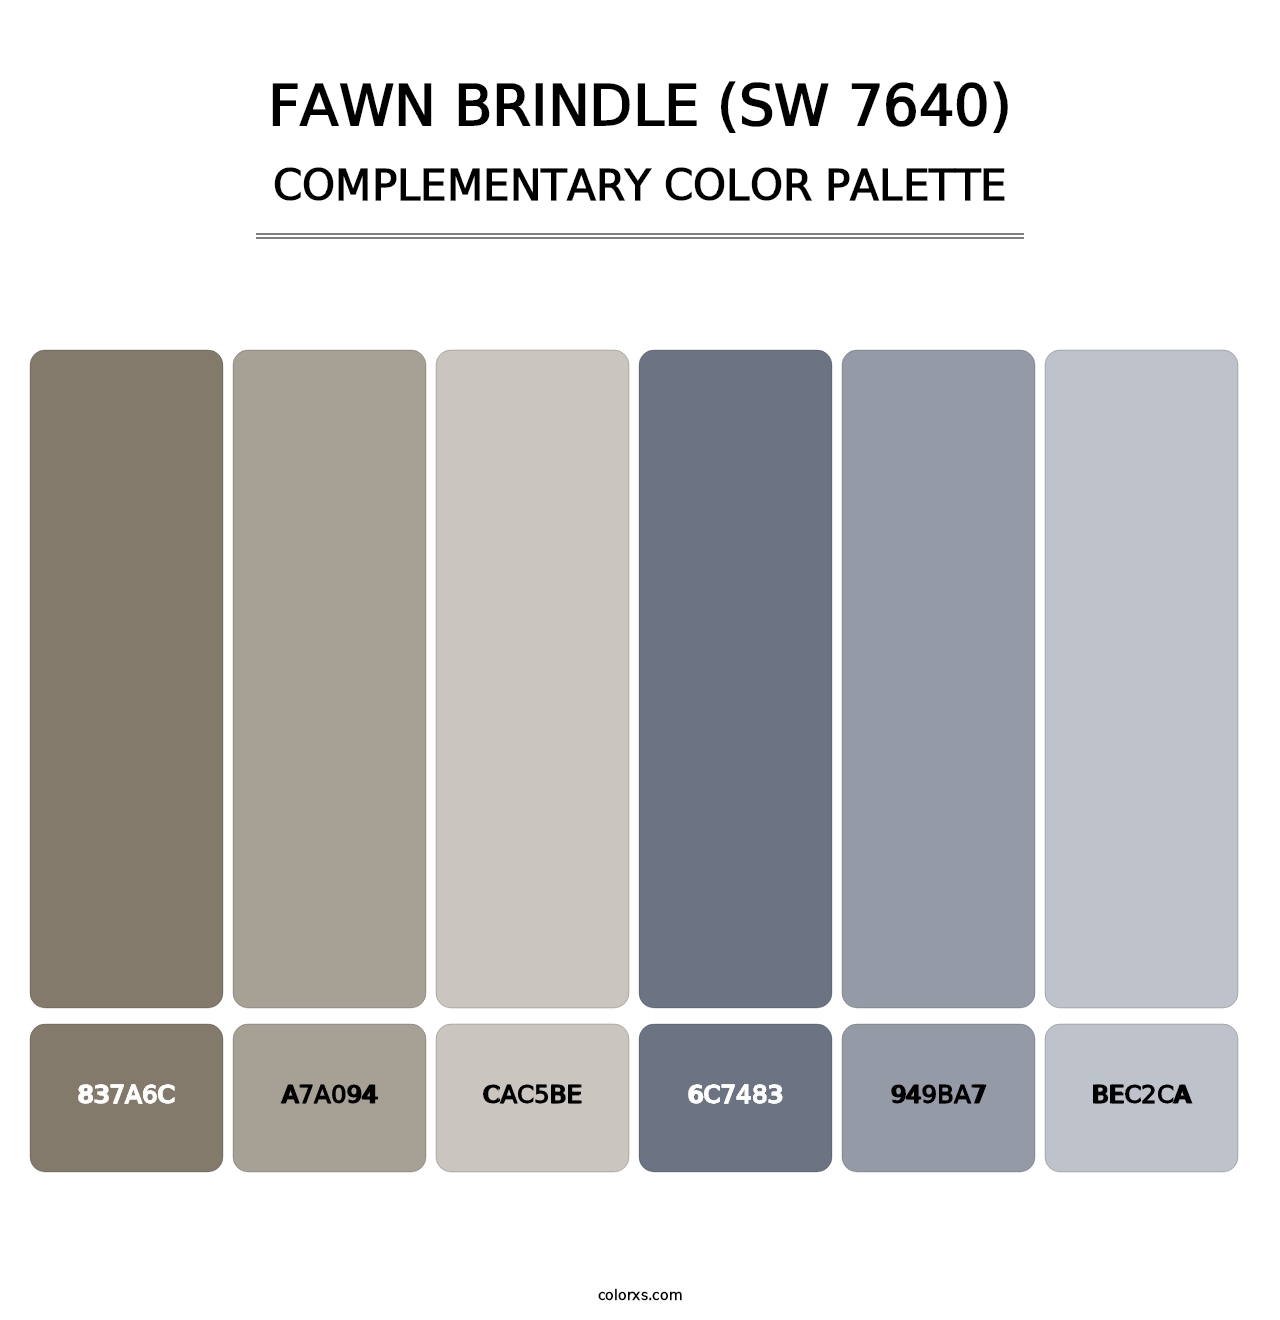 Fawn Brindle (SW 7640) - Complementary Color Palette